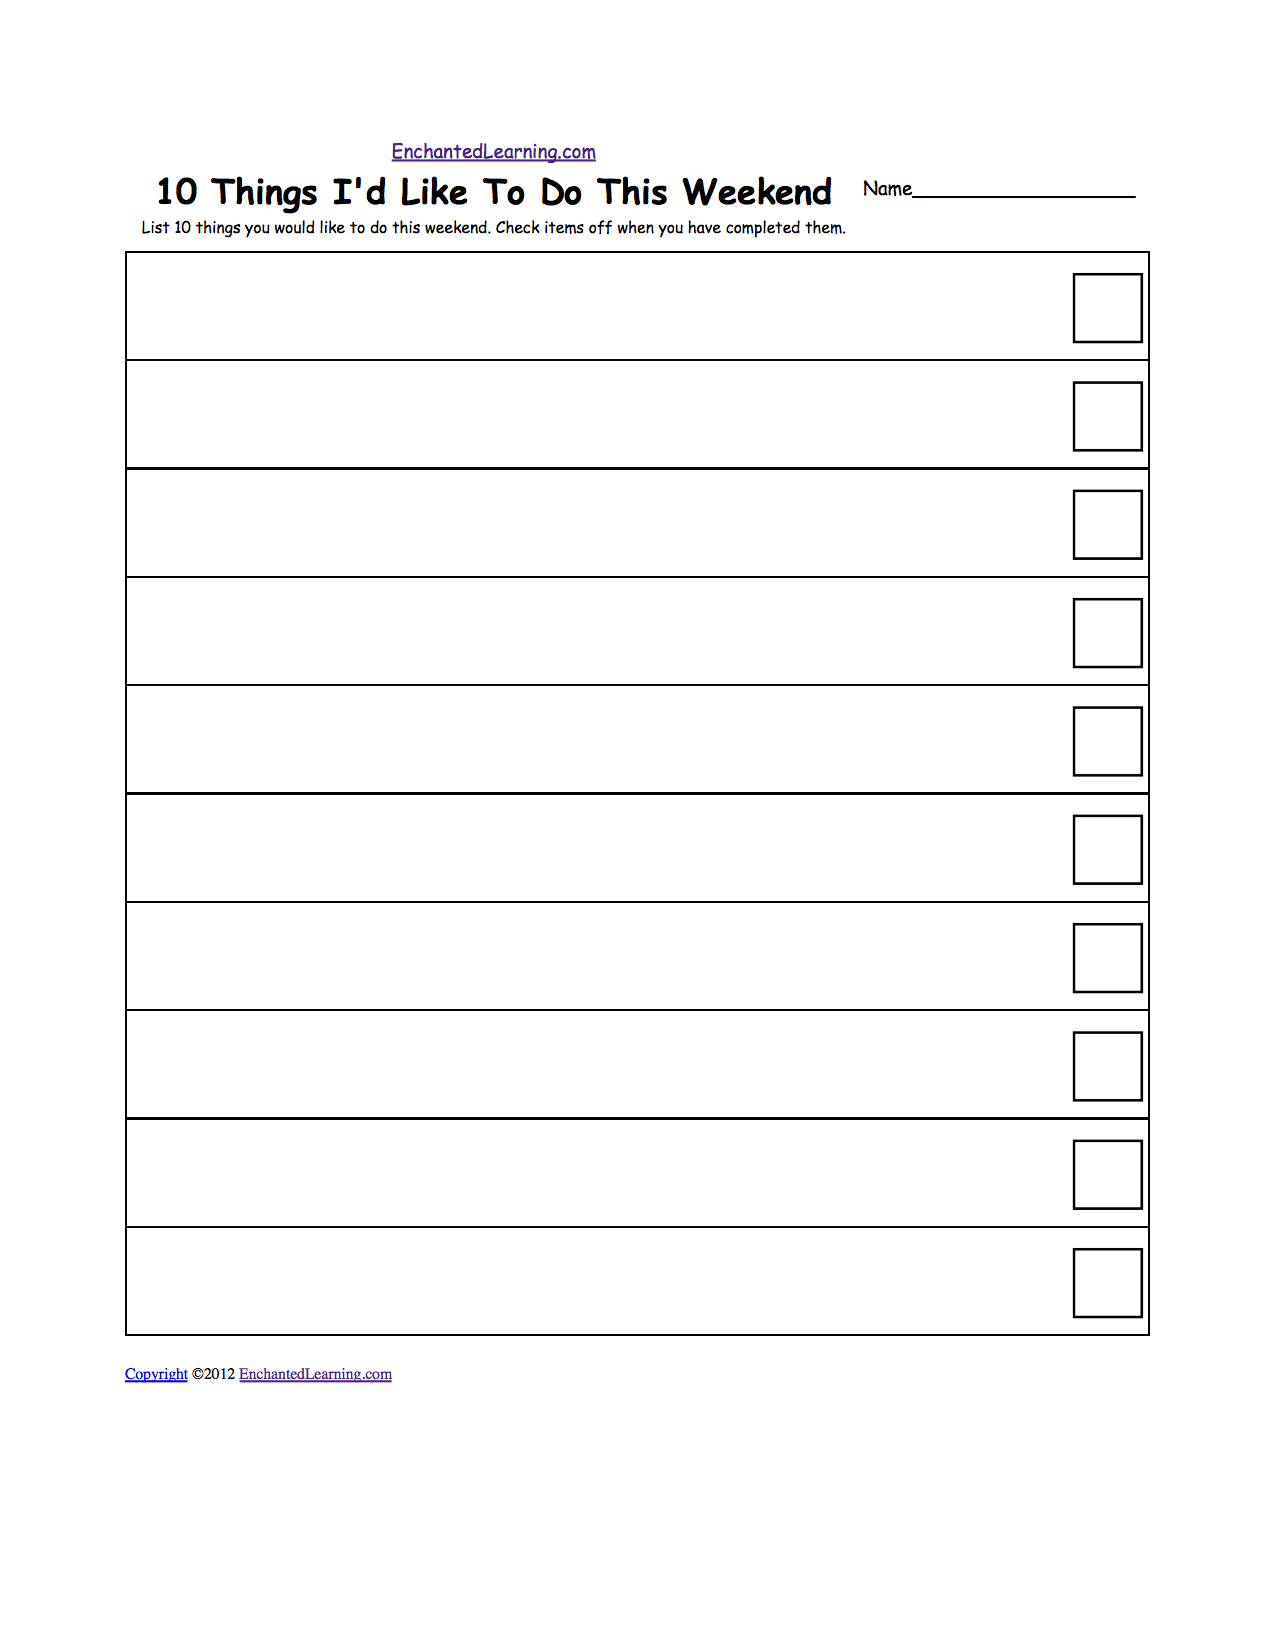 5-best-images-of-free-check-off-list-printable-to-do-list-checklist-free-printables-blank-to